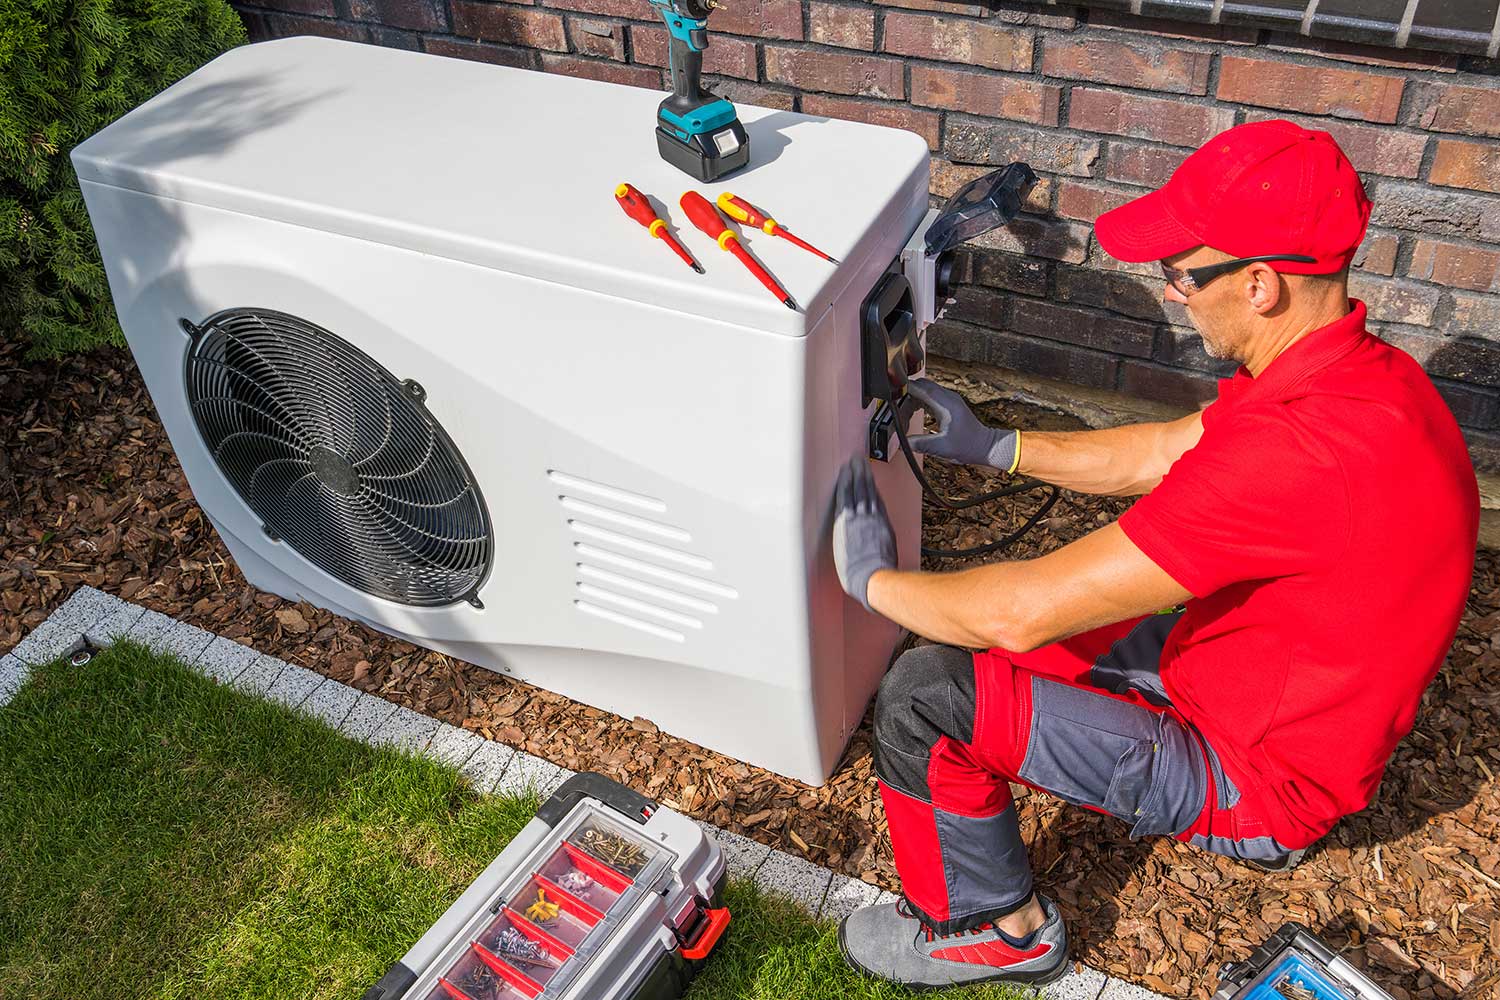 Finding the right a/c service in Jacksonville FL is hard